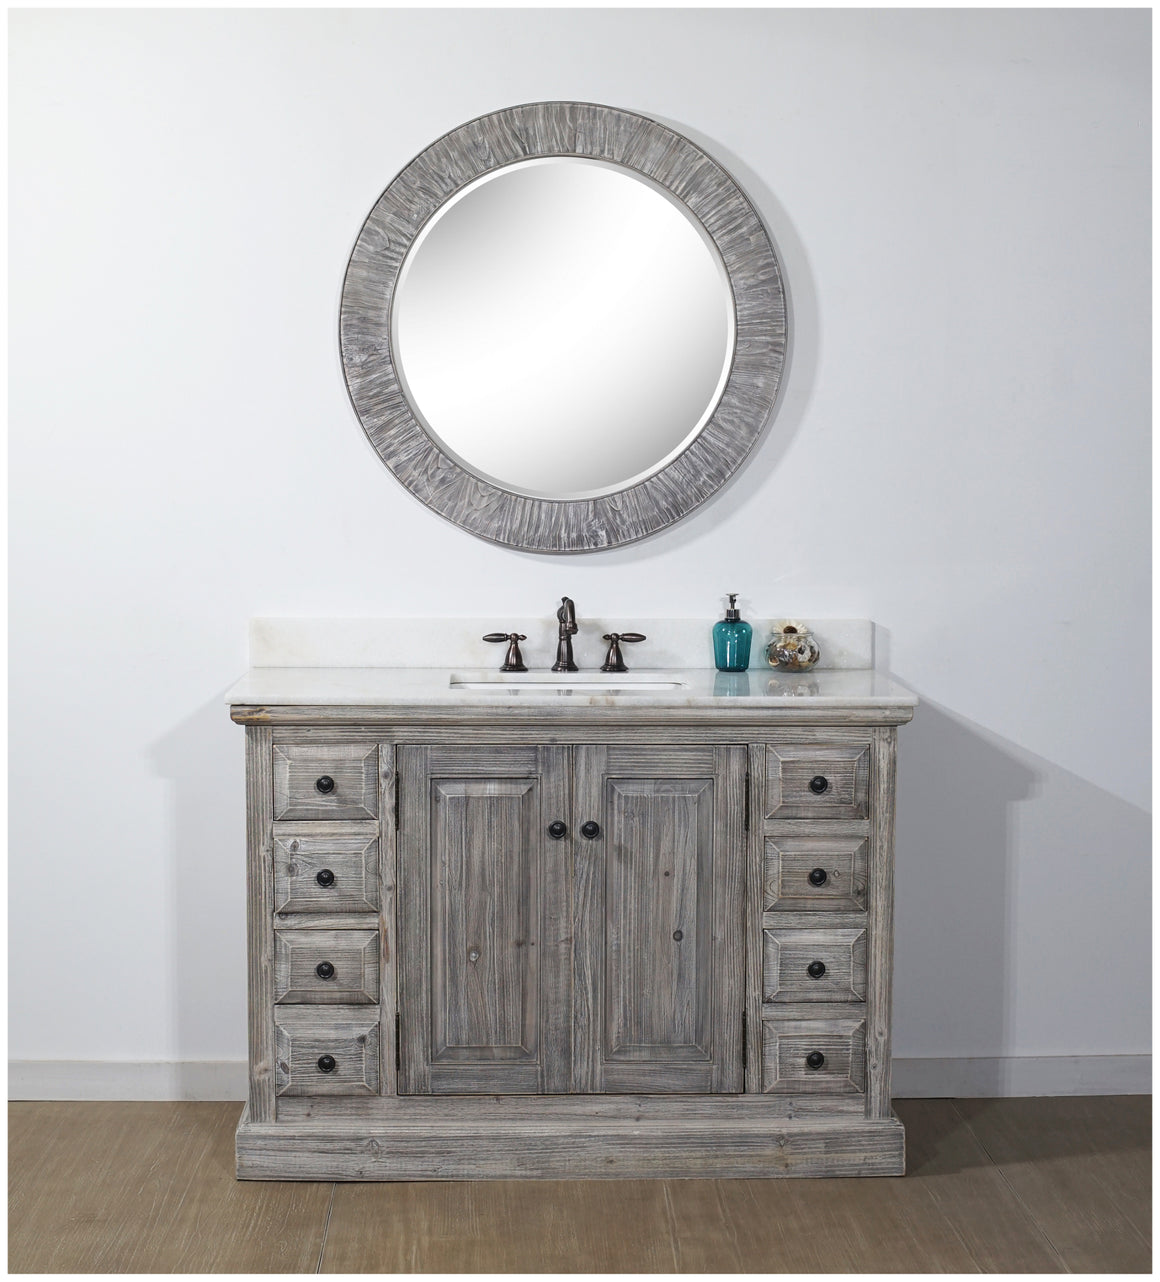 48" RUSTIC SOLID FIR SINGLE SINK VANITY IN GREY-DRIFTWOOD WITH ARCTIC PEARL QUARTZ MARBLE TOP-NO FAUCET